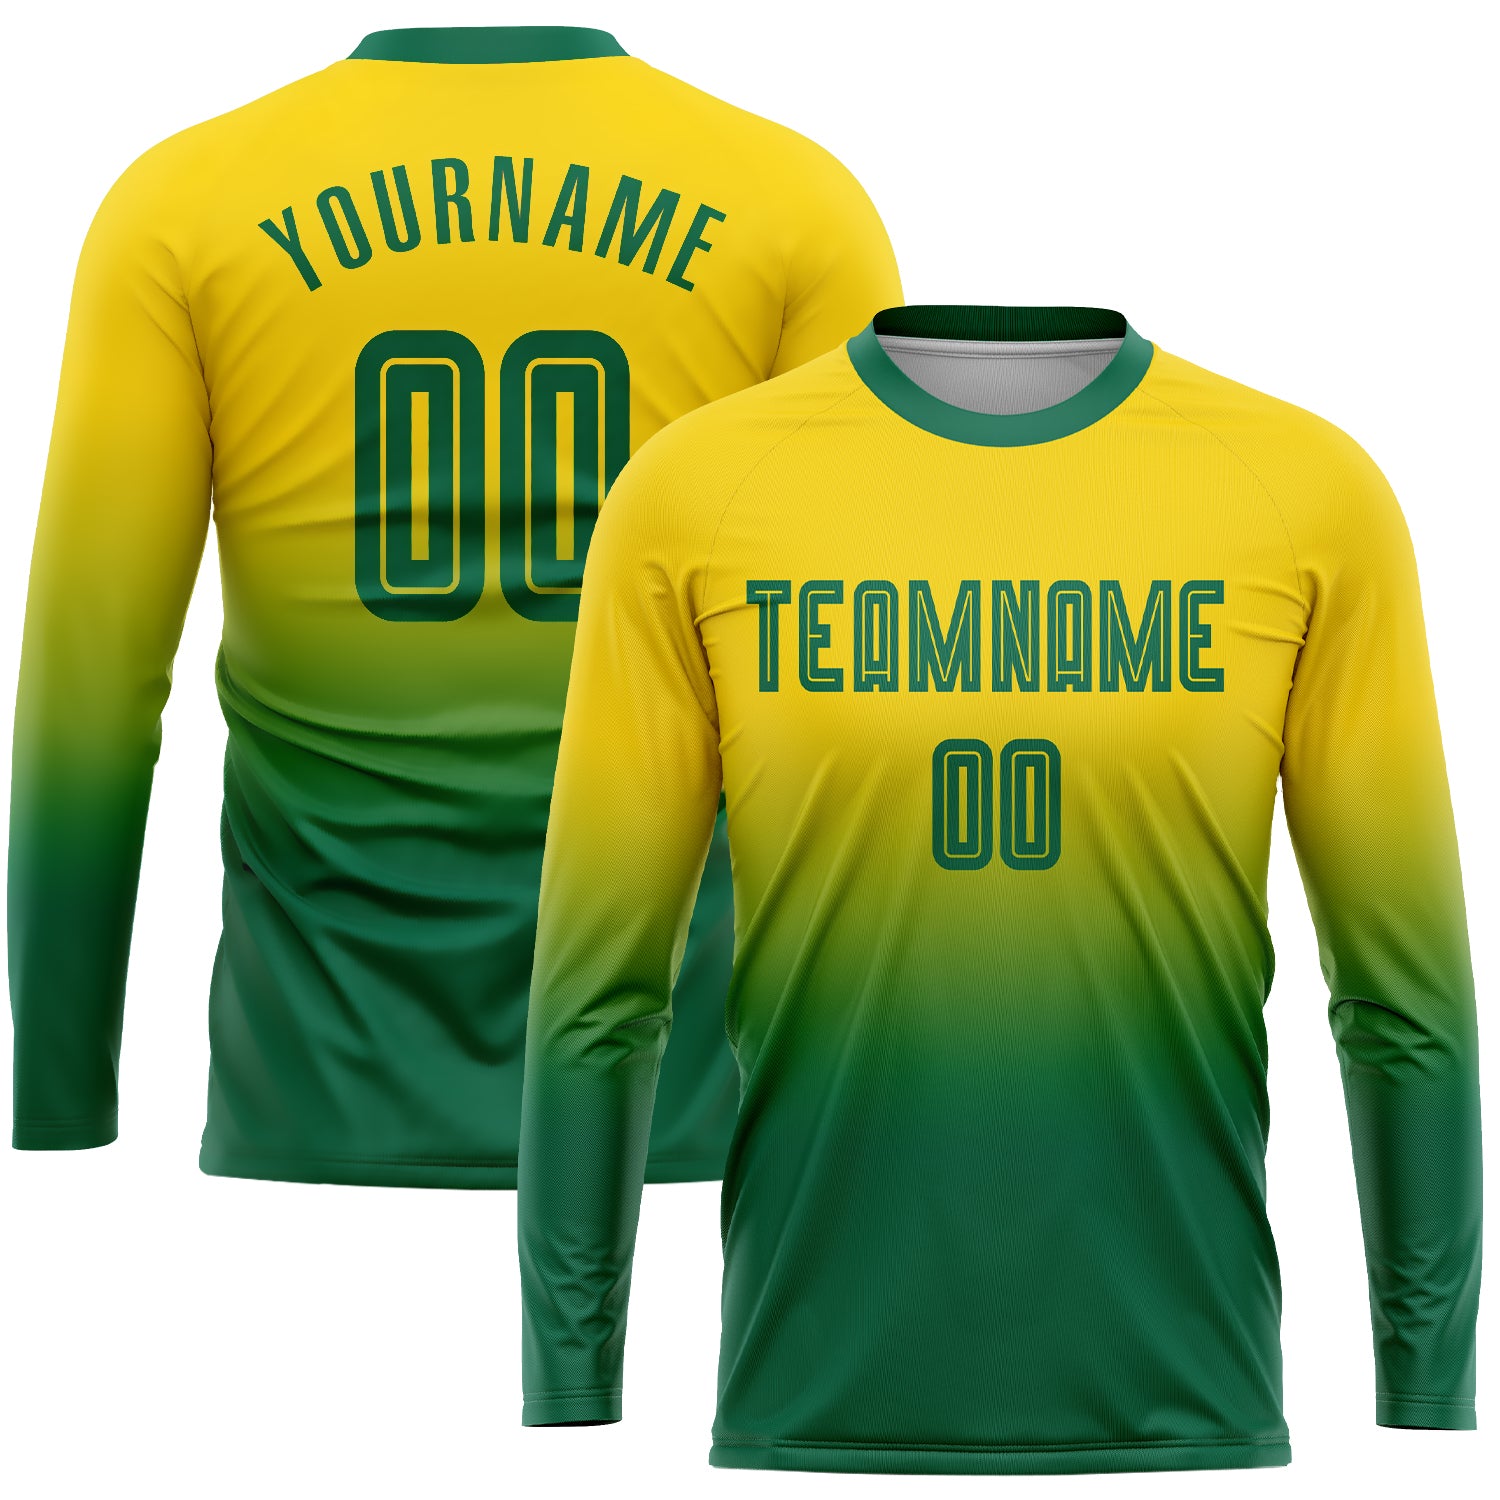 Simple Elegant Green and Gold Sublimation Jersey Stock